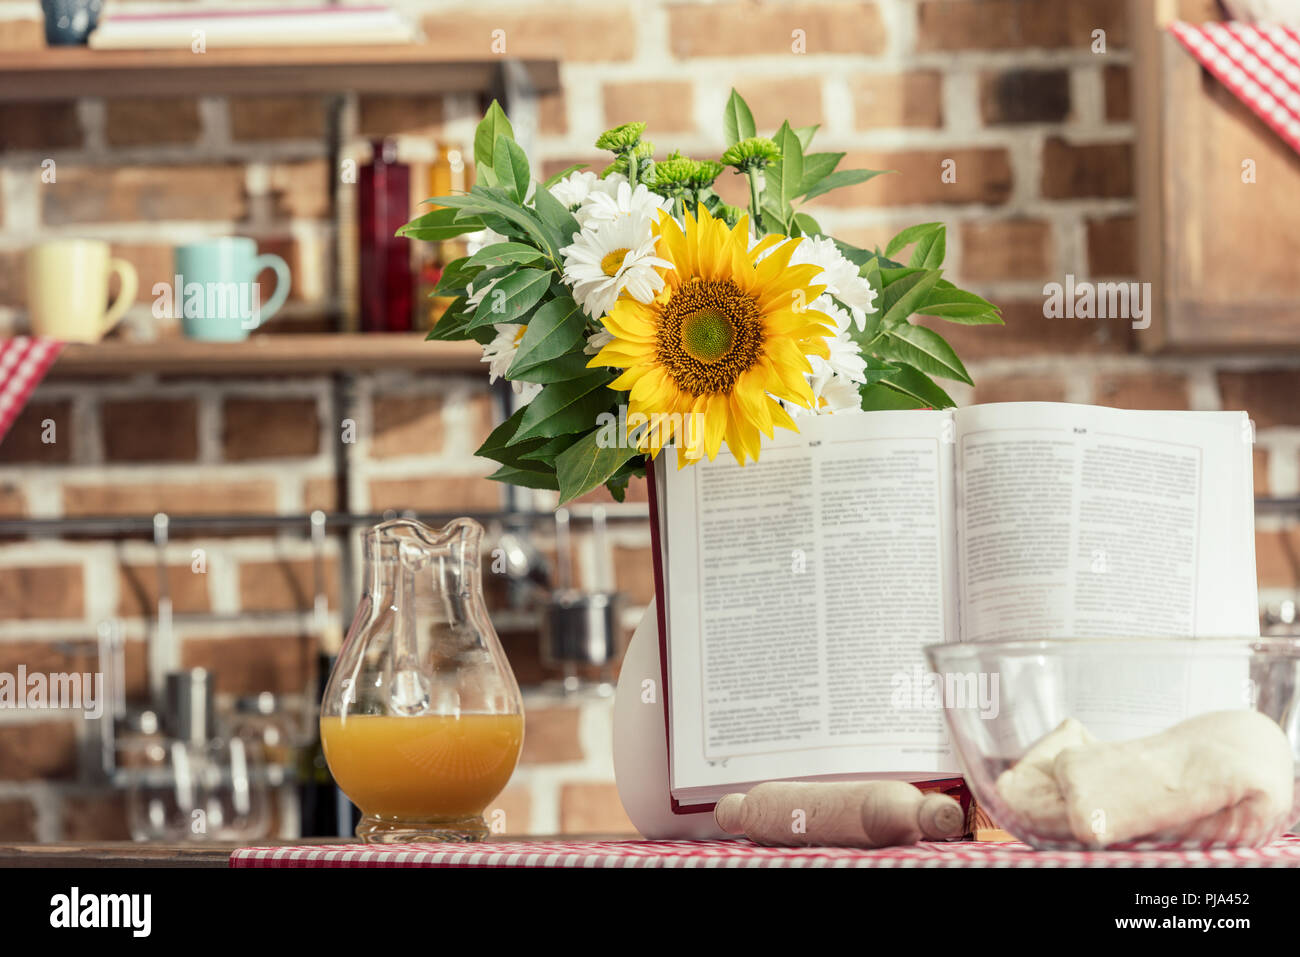 recipe book and bouquet of flowers on cooking table at kitchen Stock Photo